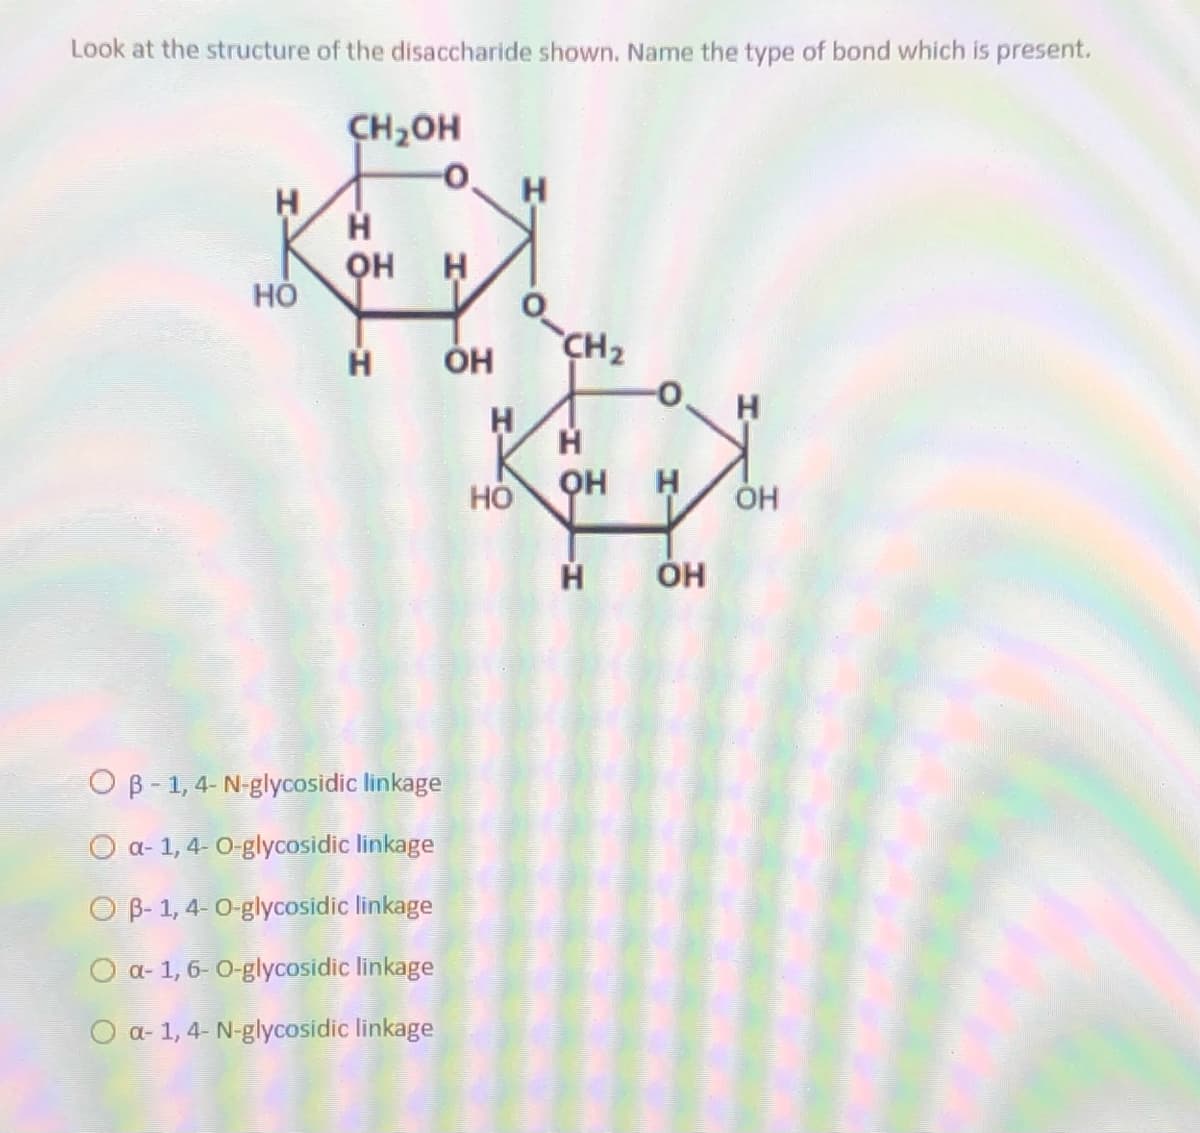 Look at the structure of the disaccharide shown. Name the type of bond which is present.
CH,OH
H
H
он
но
CH2
Он
H
он
H
ÓH
O B - 1, 4- N-glycosidic linkage
O a- 1, 4- O-glycosidic linkage
O B- 1, 4-0-glycosidic linkage
O a- 1, 6- 0-glycosidic linkage
O a- 1, 4- N-glycosidic linkage
